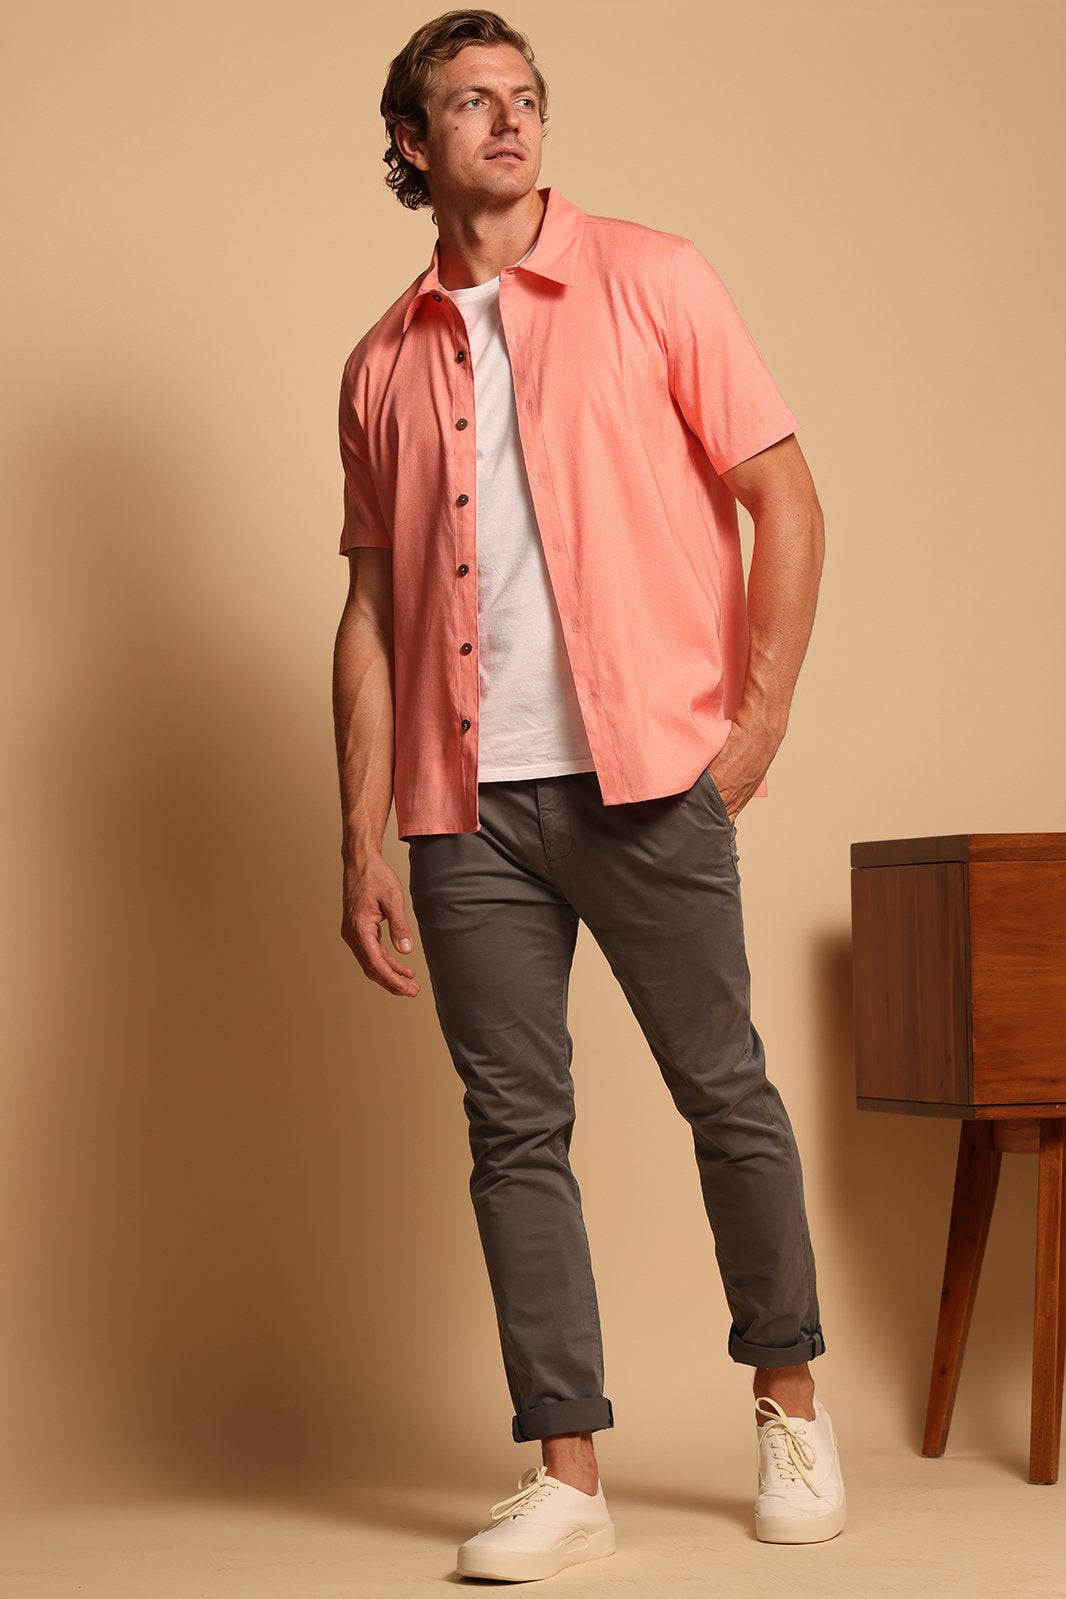 CHARLES LINEN CAMP SHIRT - CORAL ALMOND - S